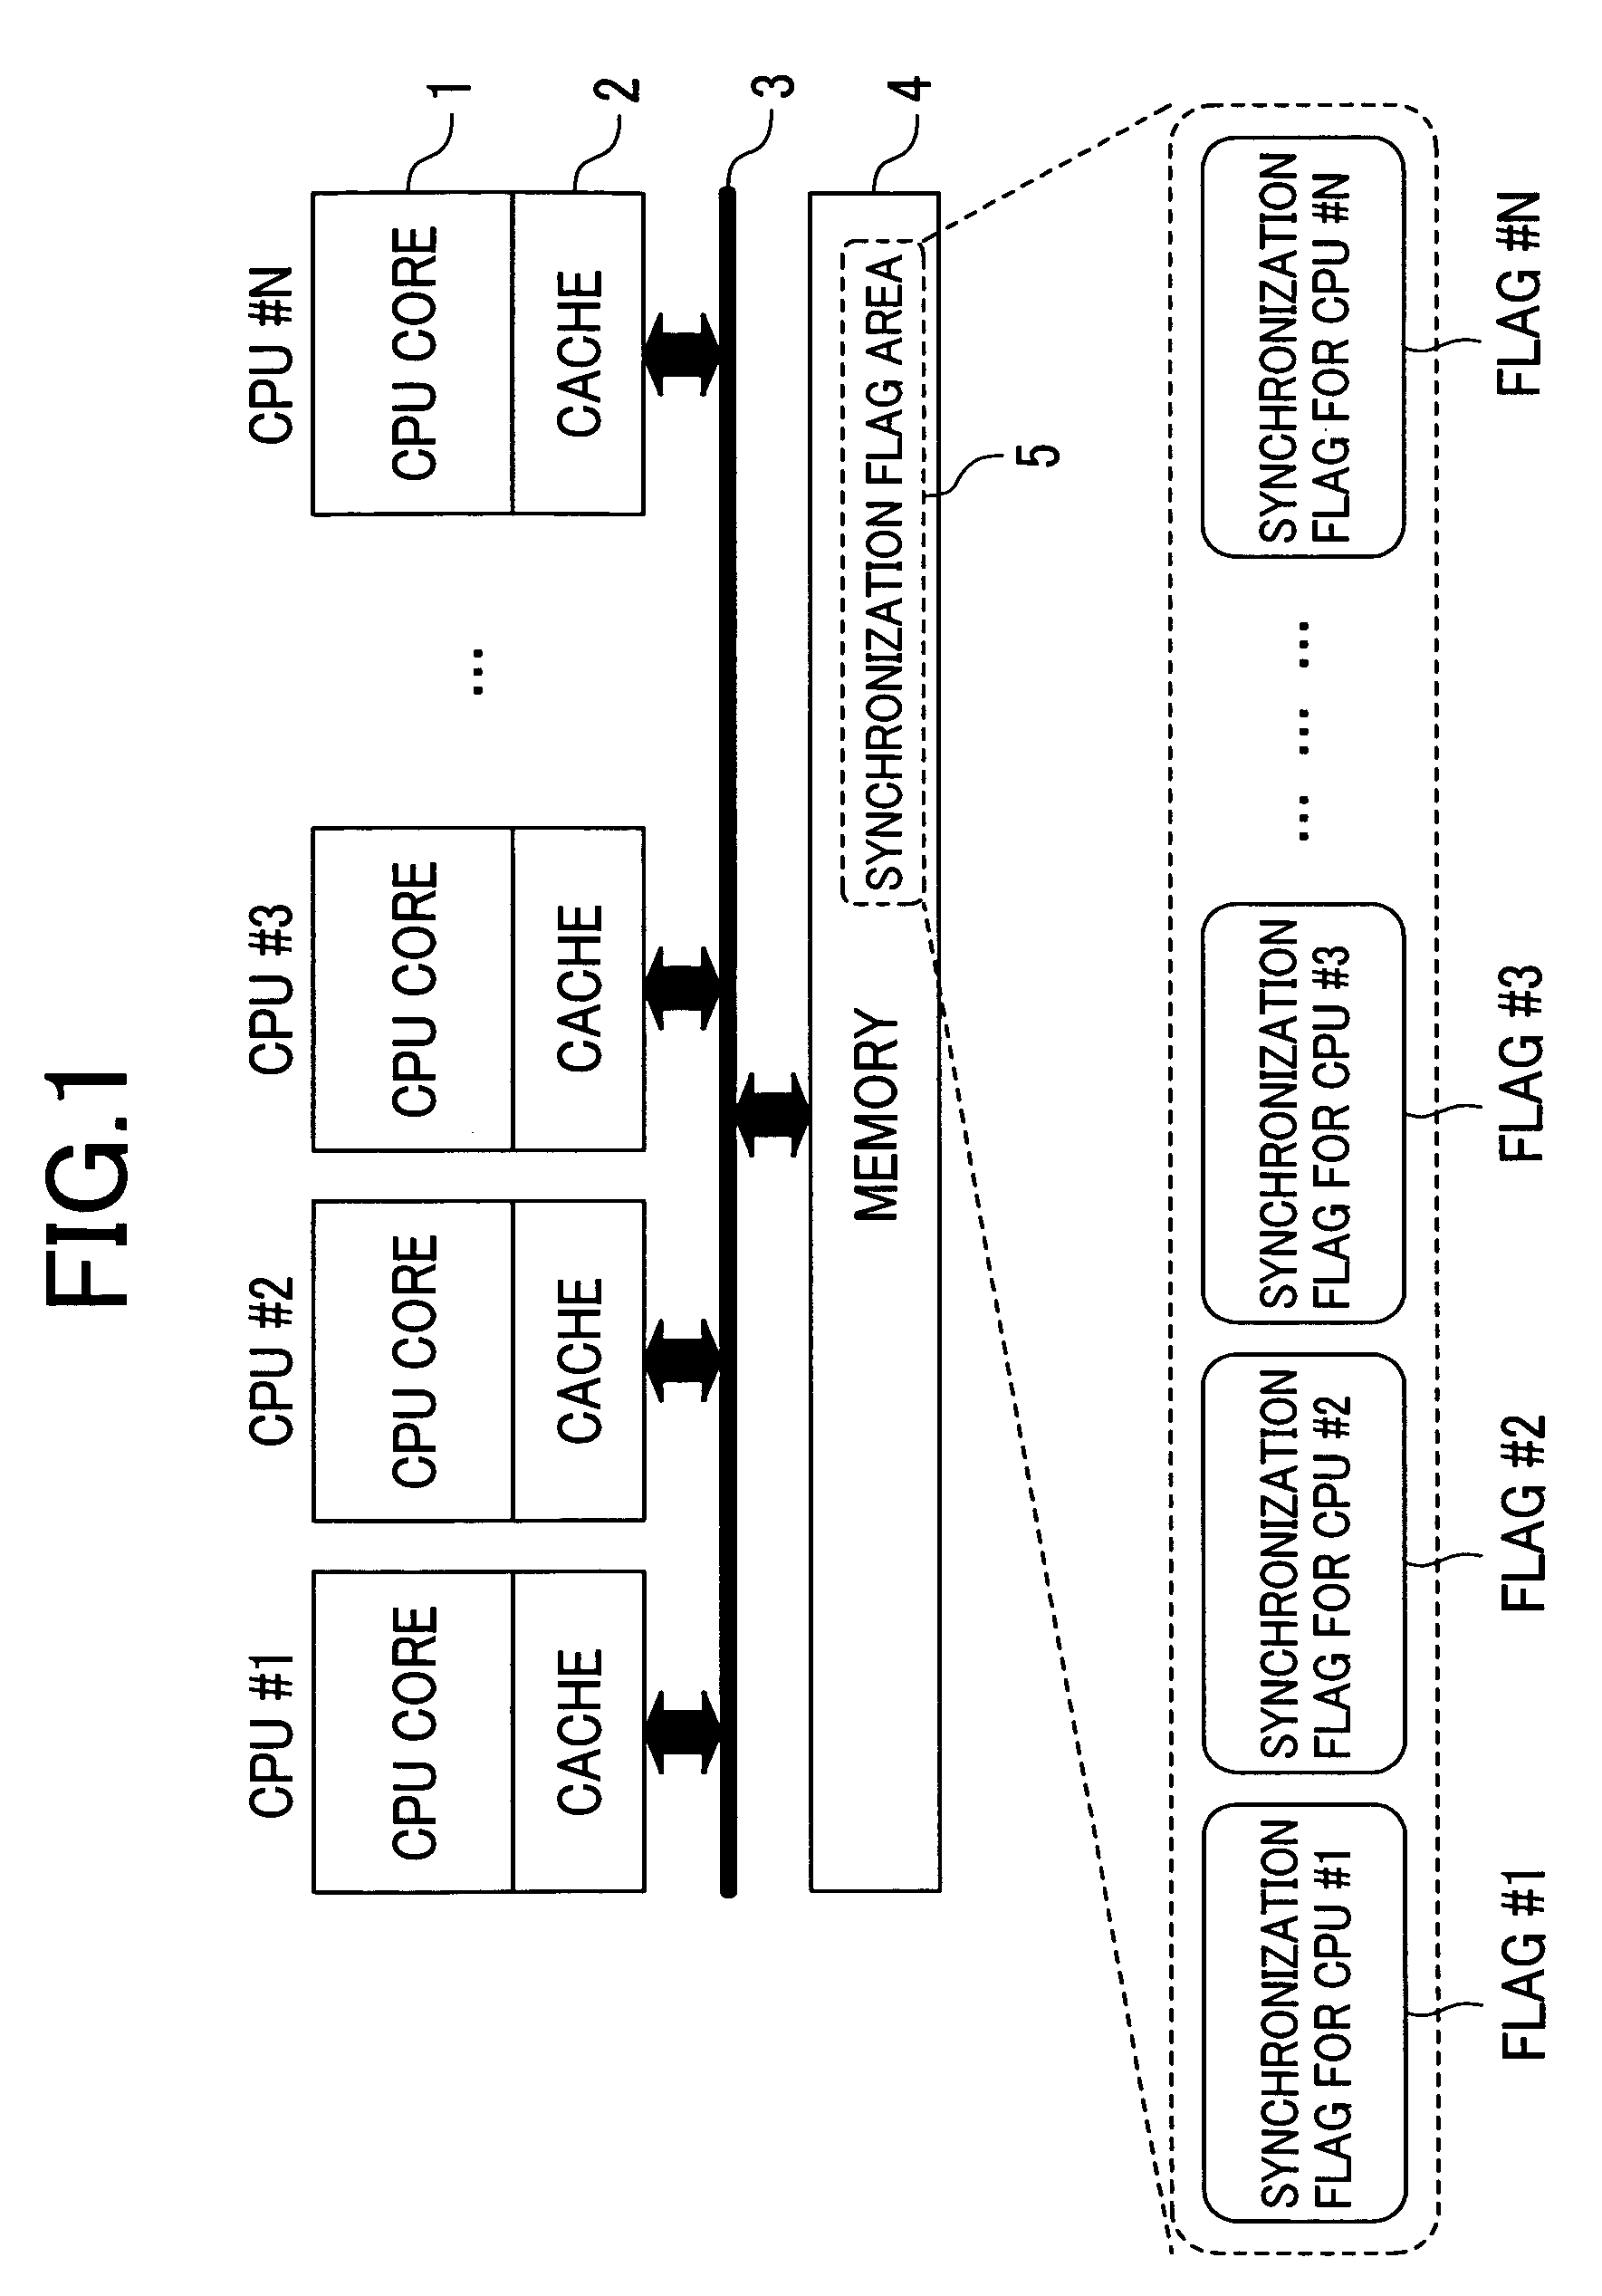 Method for synchronizing processors in a multiprocessor system